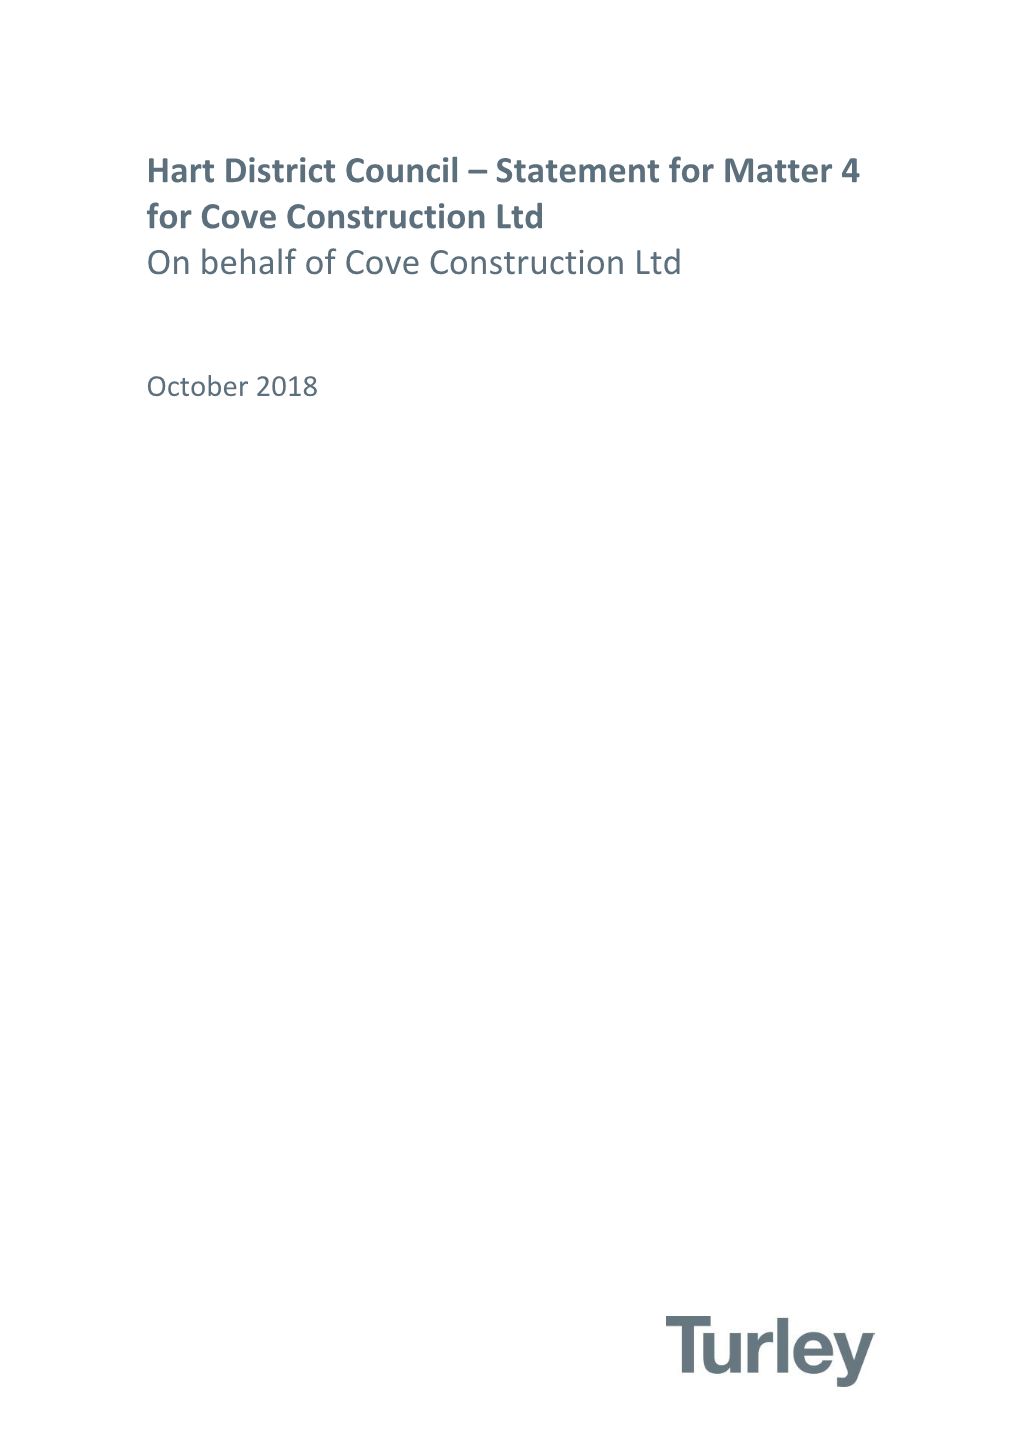 Statement for Matter 4 for Cove Construction Ltd on Behalf of Cove Construction Ltd